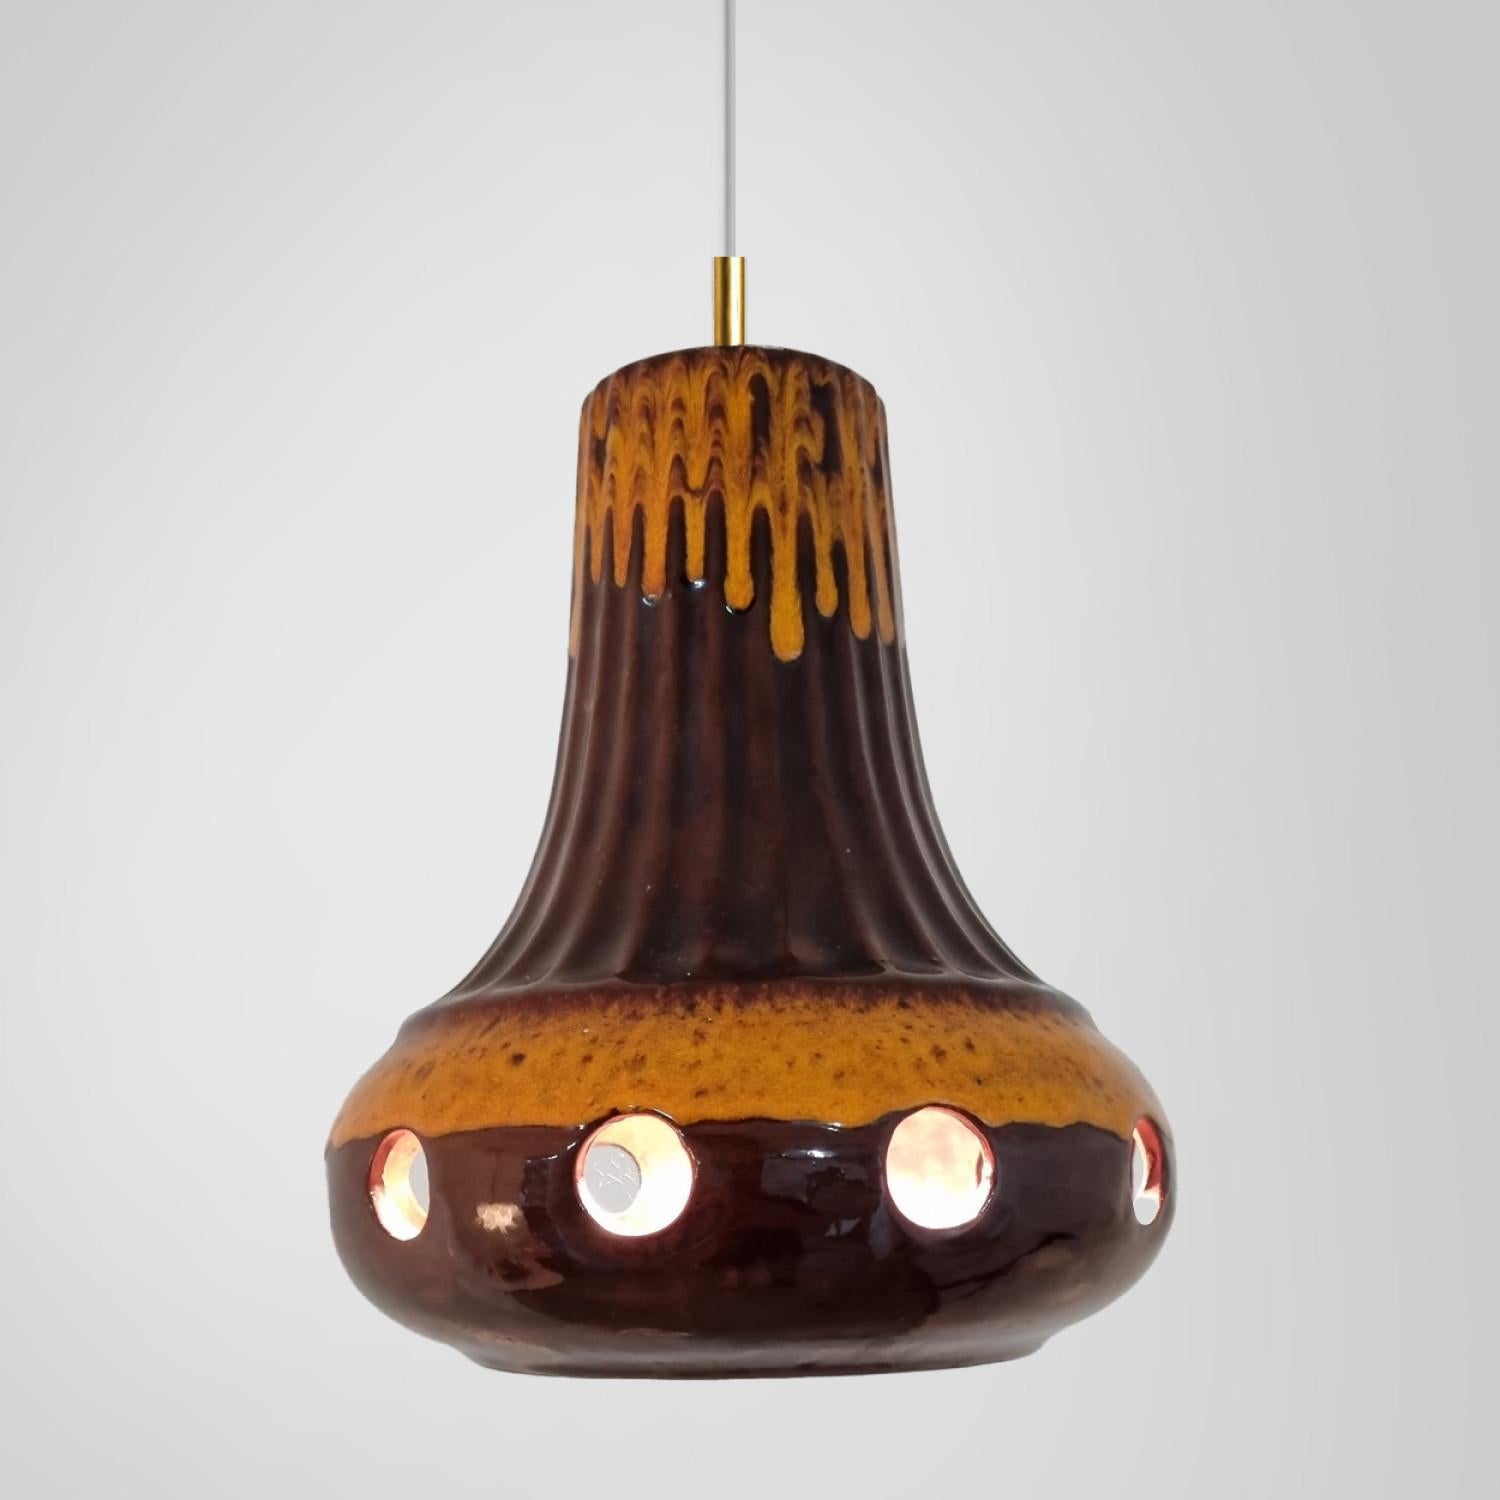 A set of spectacular and stylish ceramic pendant lights made in West-Germany around 1970's. The lights are made of orange and brown glazed ceramic and glazed in 'Fat Lava' style. The orange and brown ceramic fits beautifully with warm, gold or clear